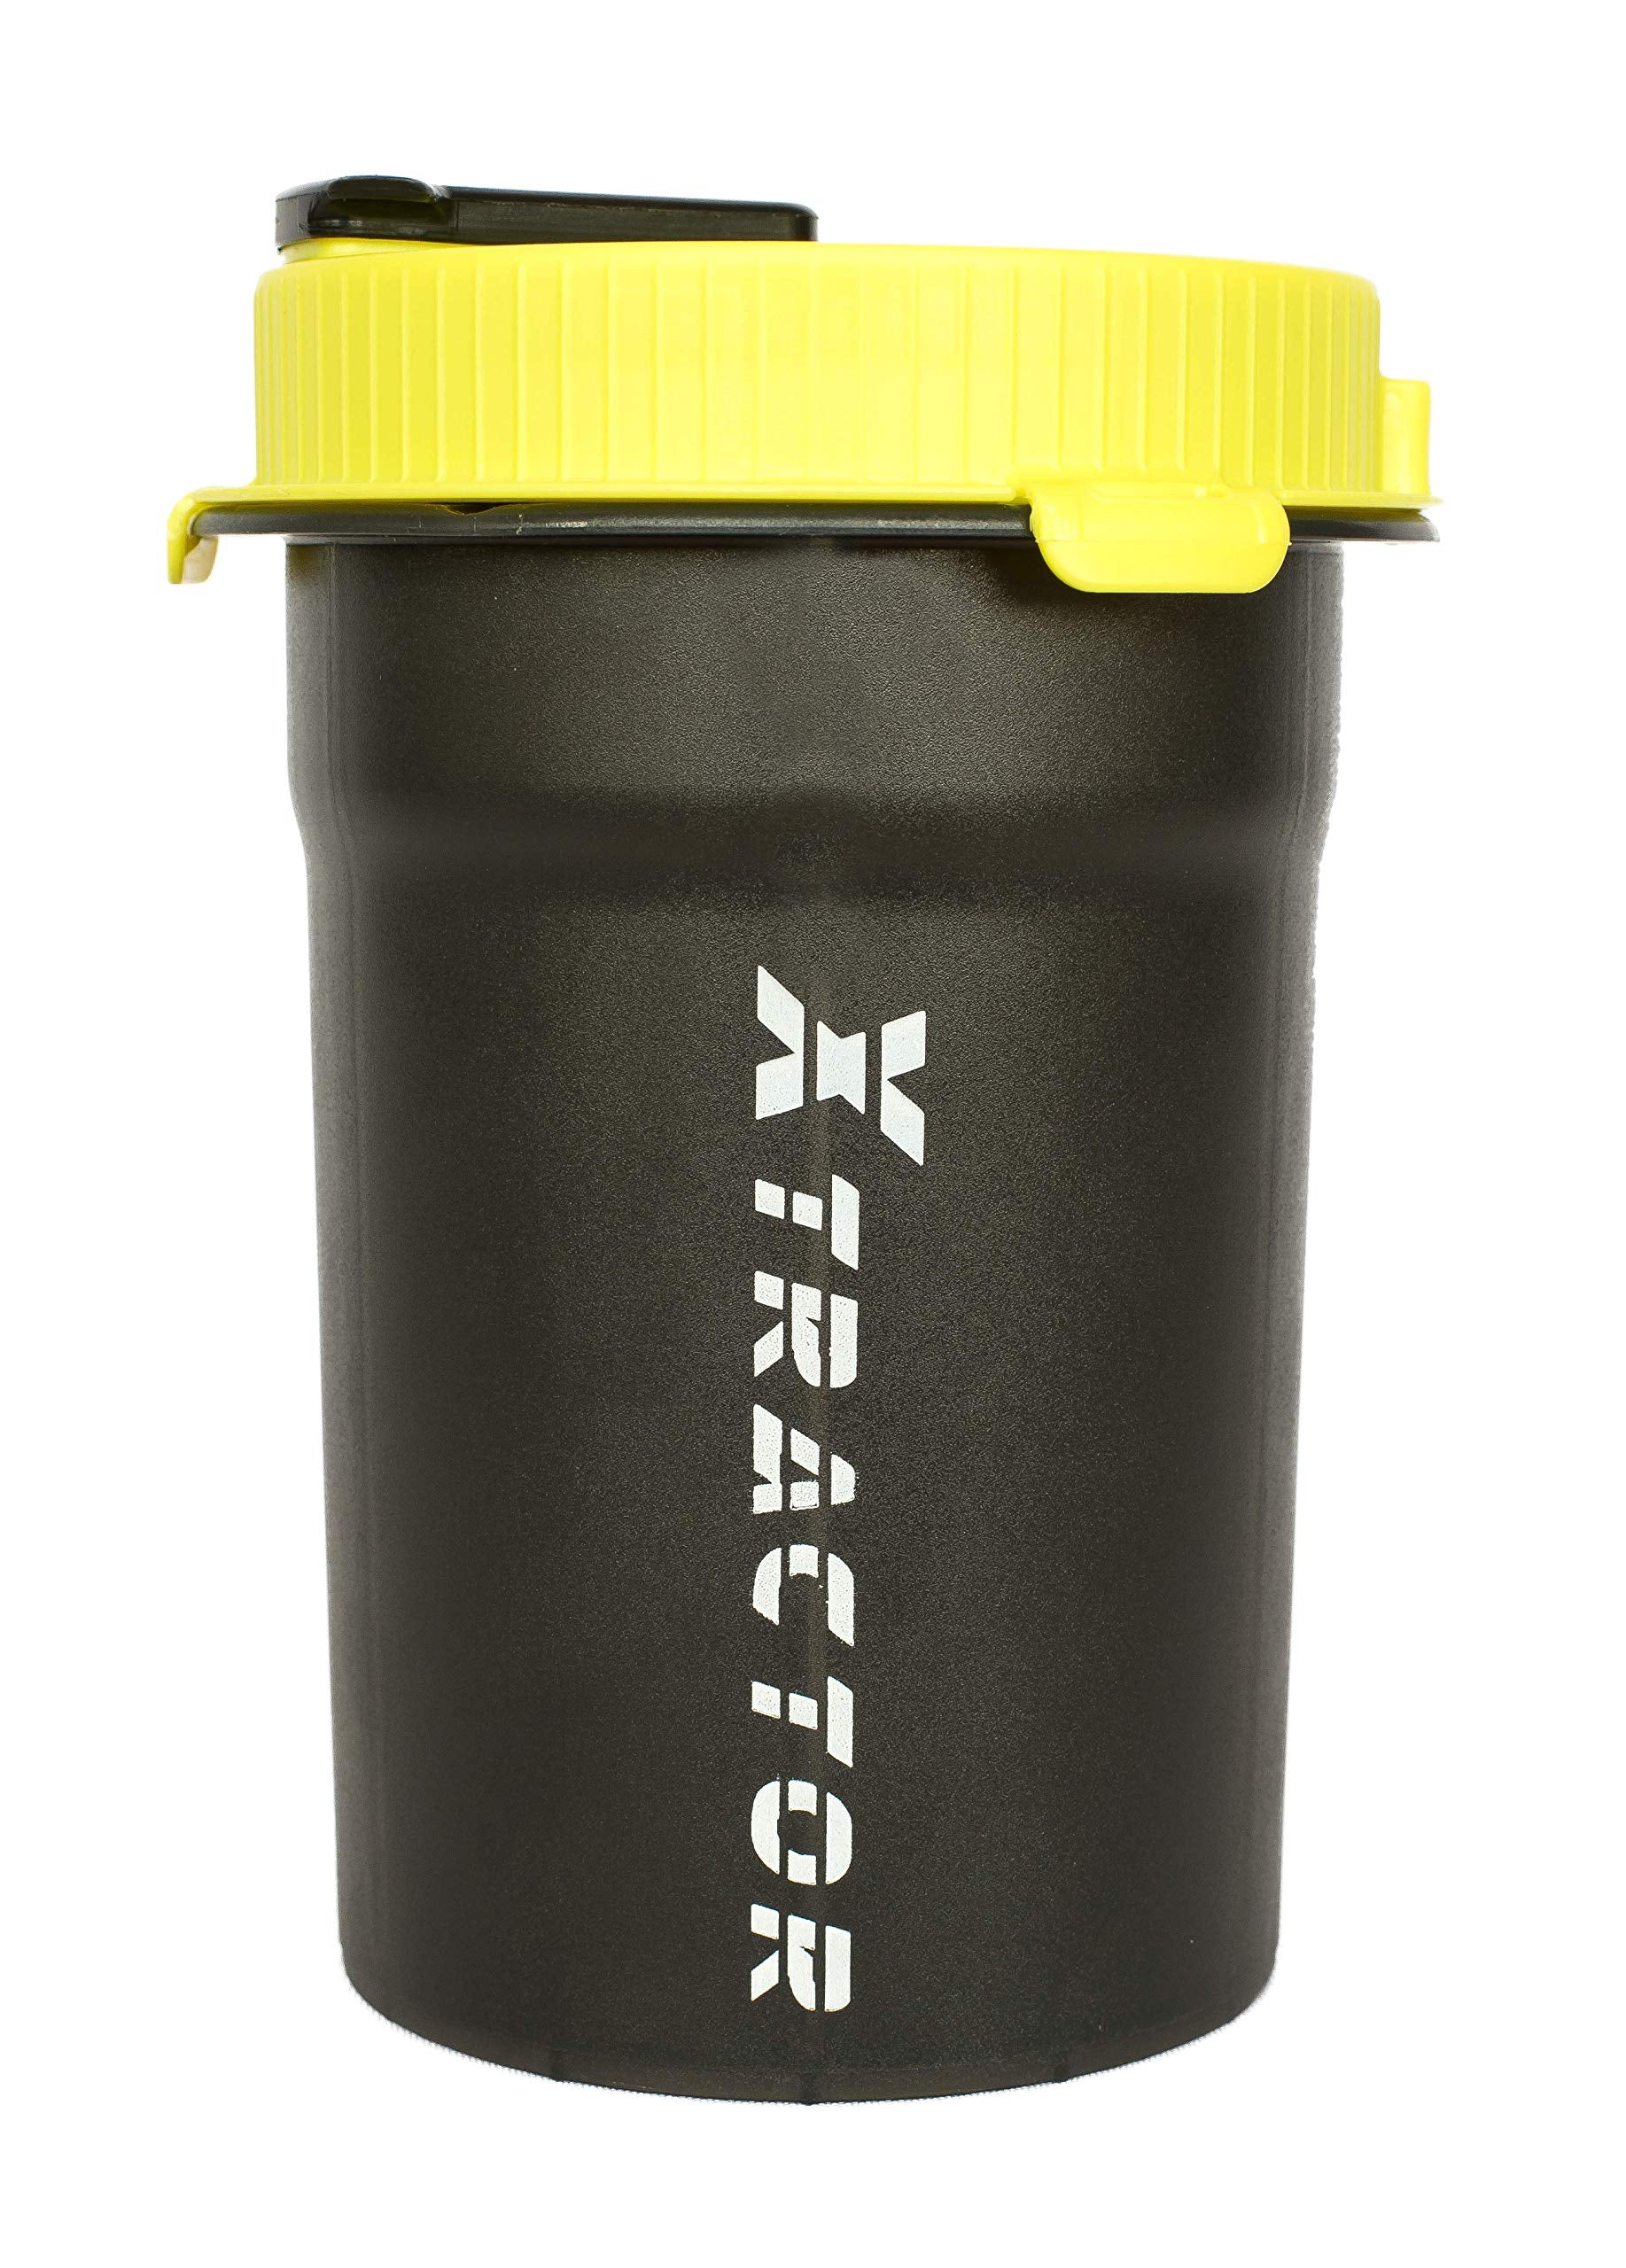 XTRACTOR - Portioner for Protein/Protein Powder - Fitness Powder Scoop - 6 portions at Once for Direct Insertion into The Shaker